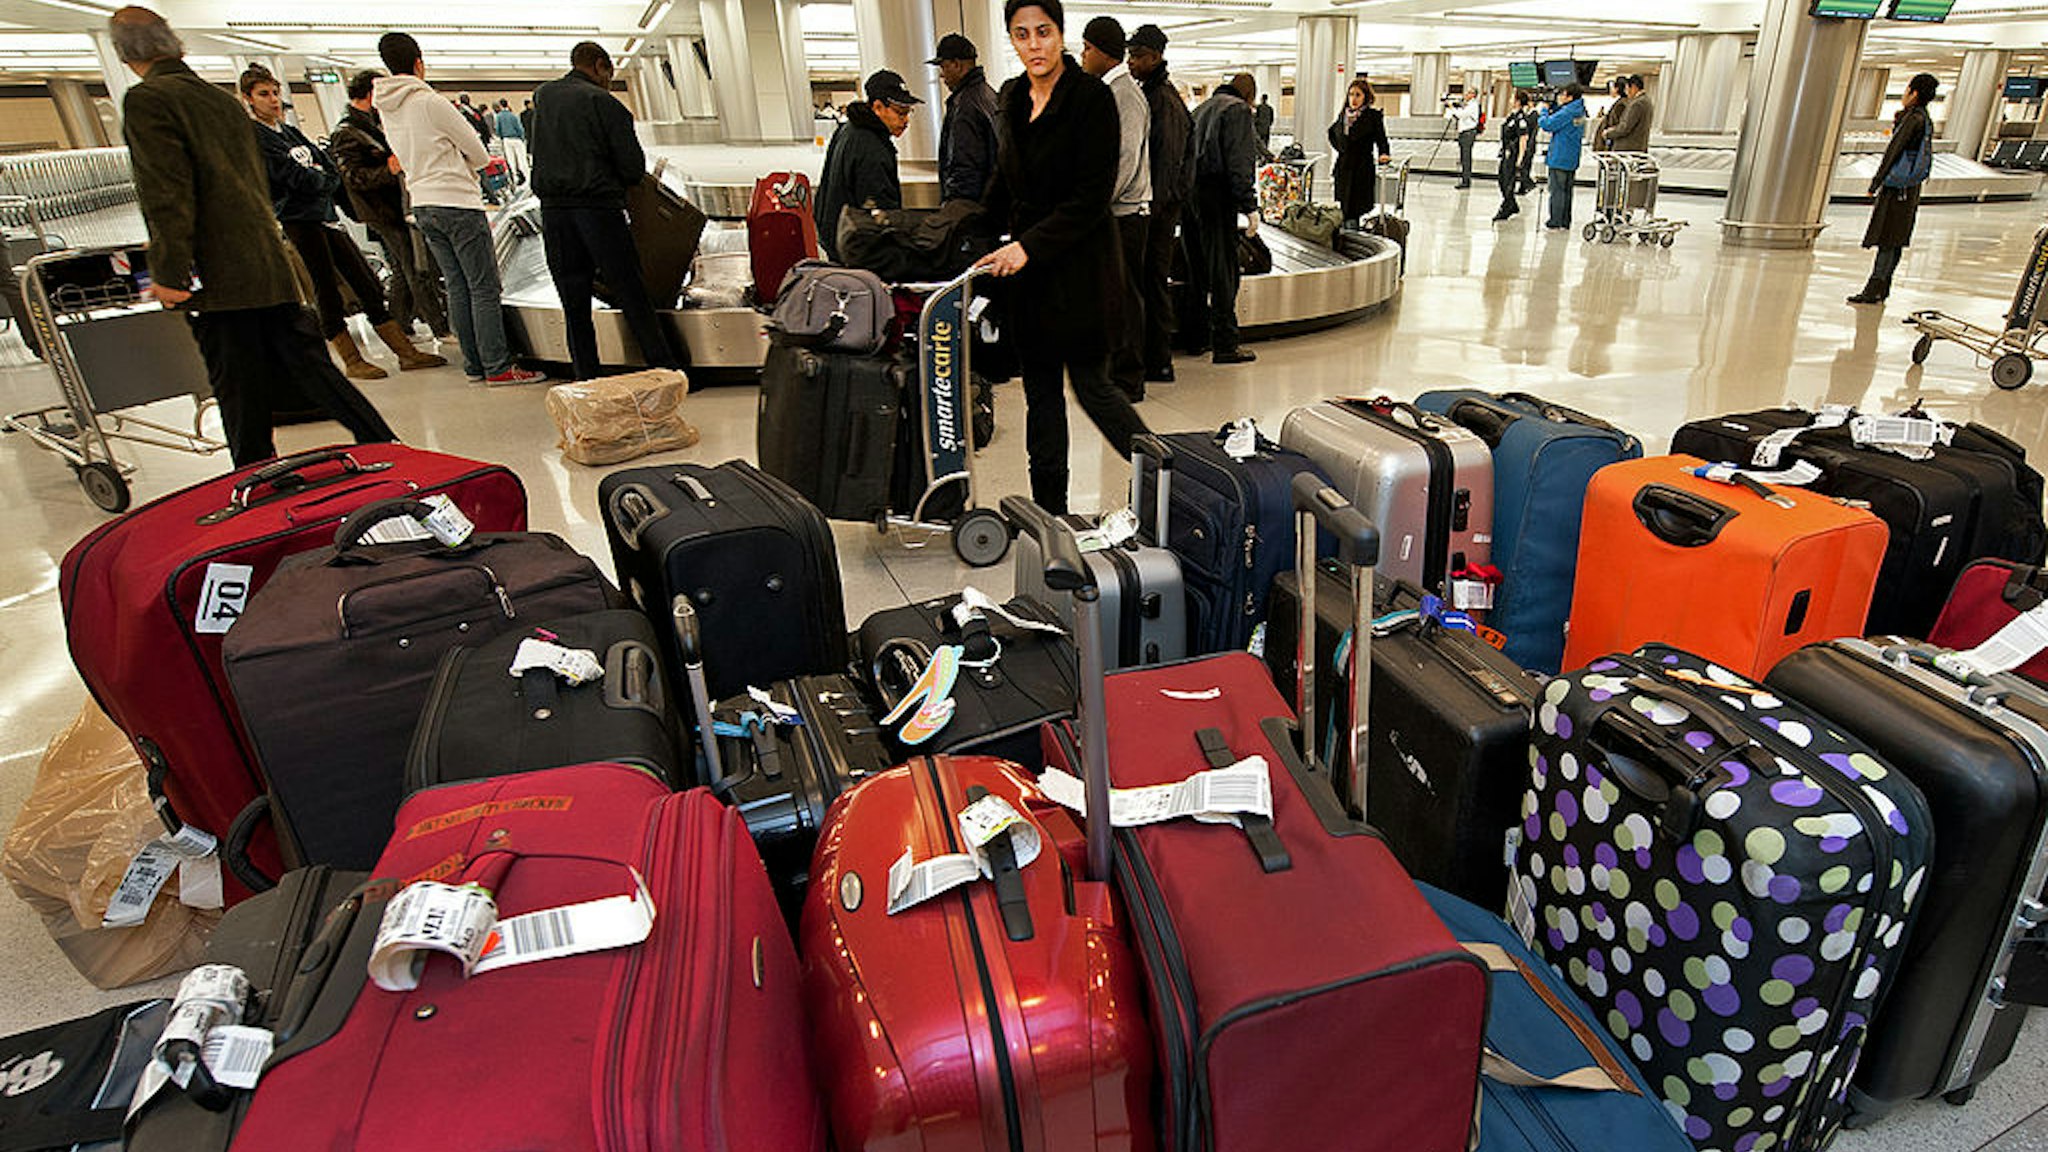 A woman pushes her luggage cart past unclaimed bags inside the US Customs and Border Protection inspection area at Dulles International Airport (IAD), December 21, 2011 in Sterling, Virgina, near Washington, DC.